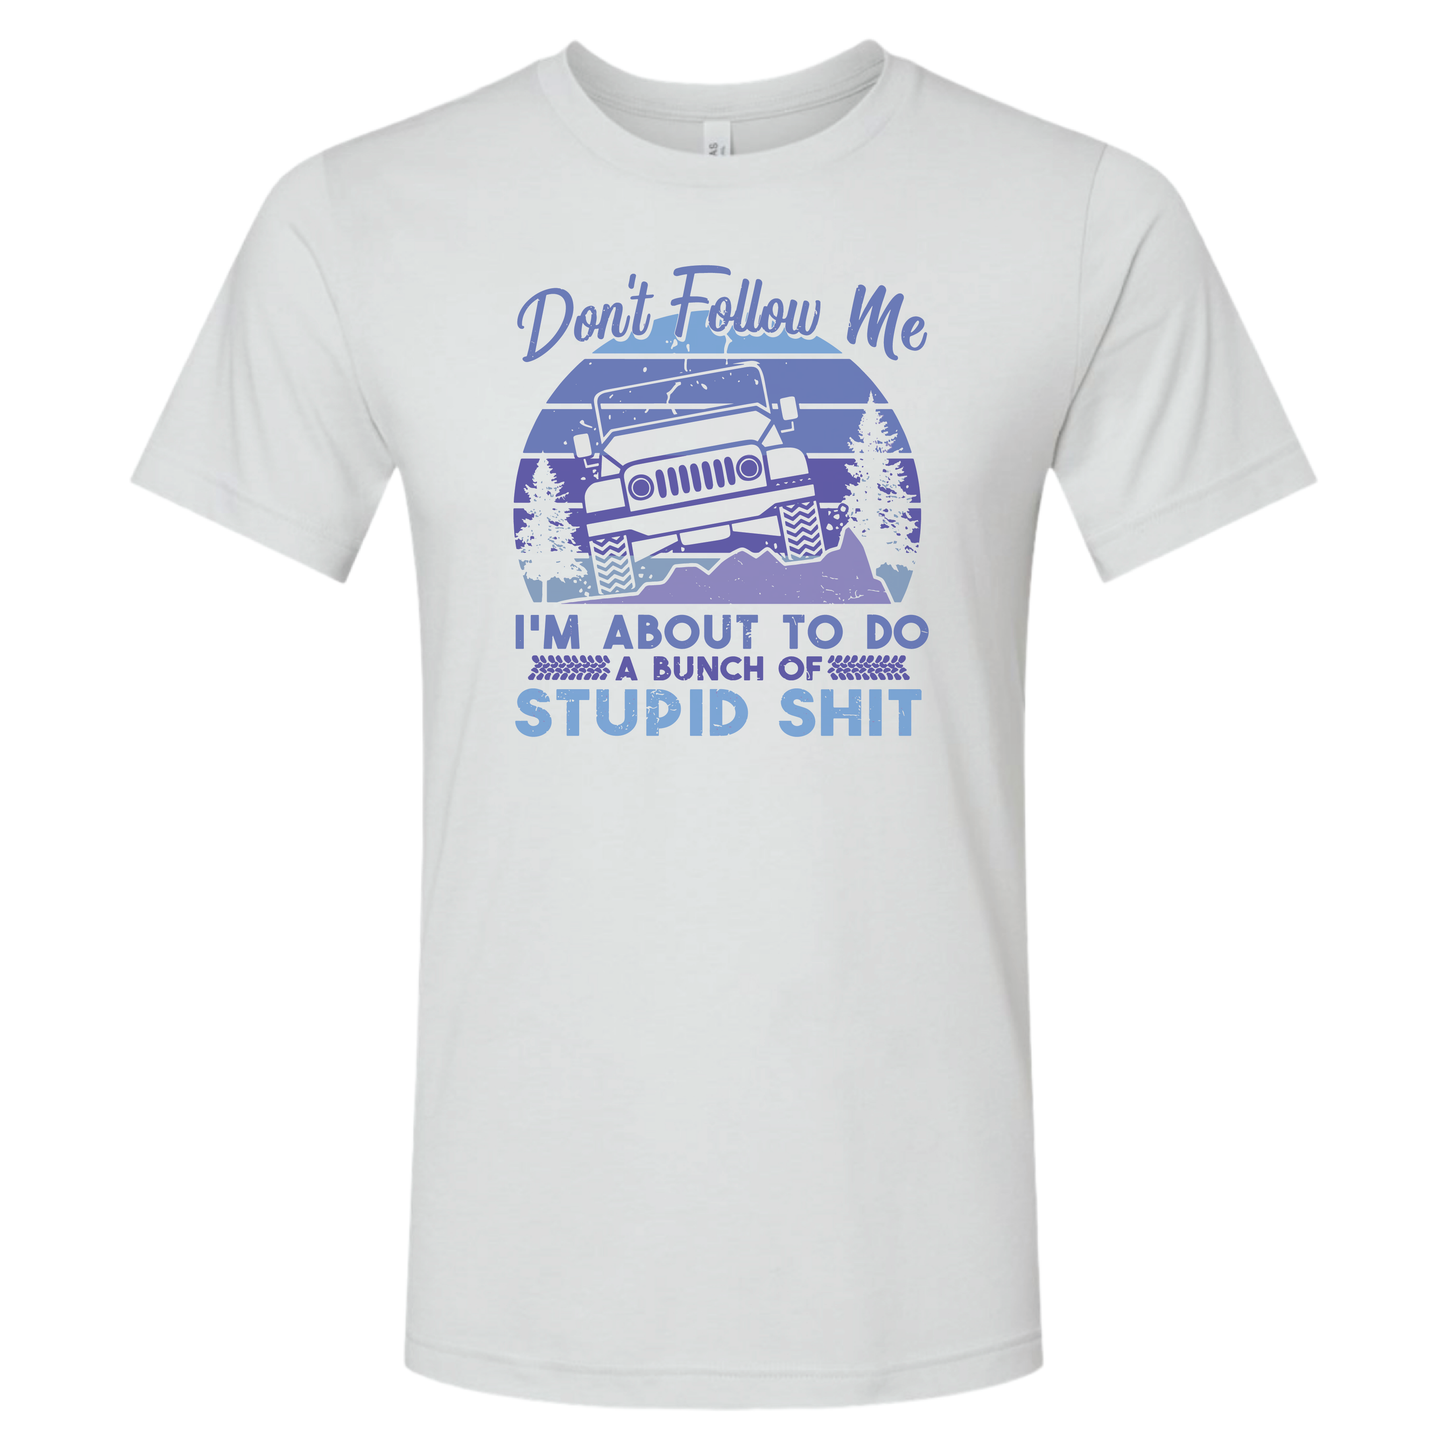 Stupid Shit - Available in Multiple Colors & Styles